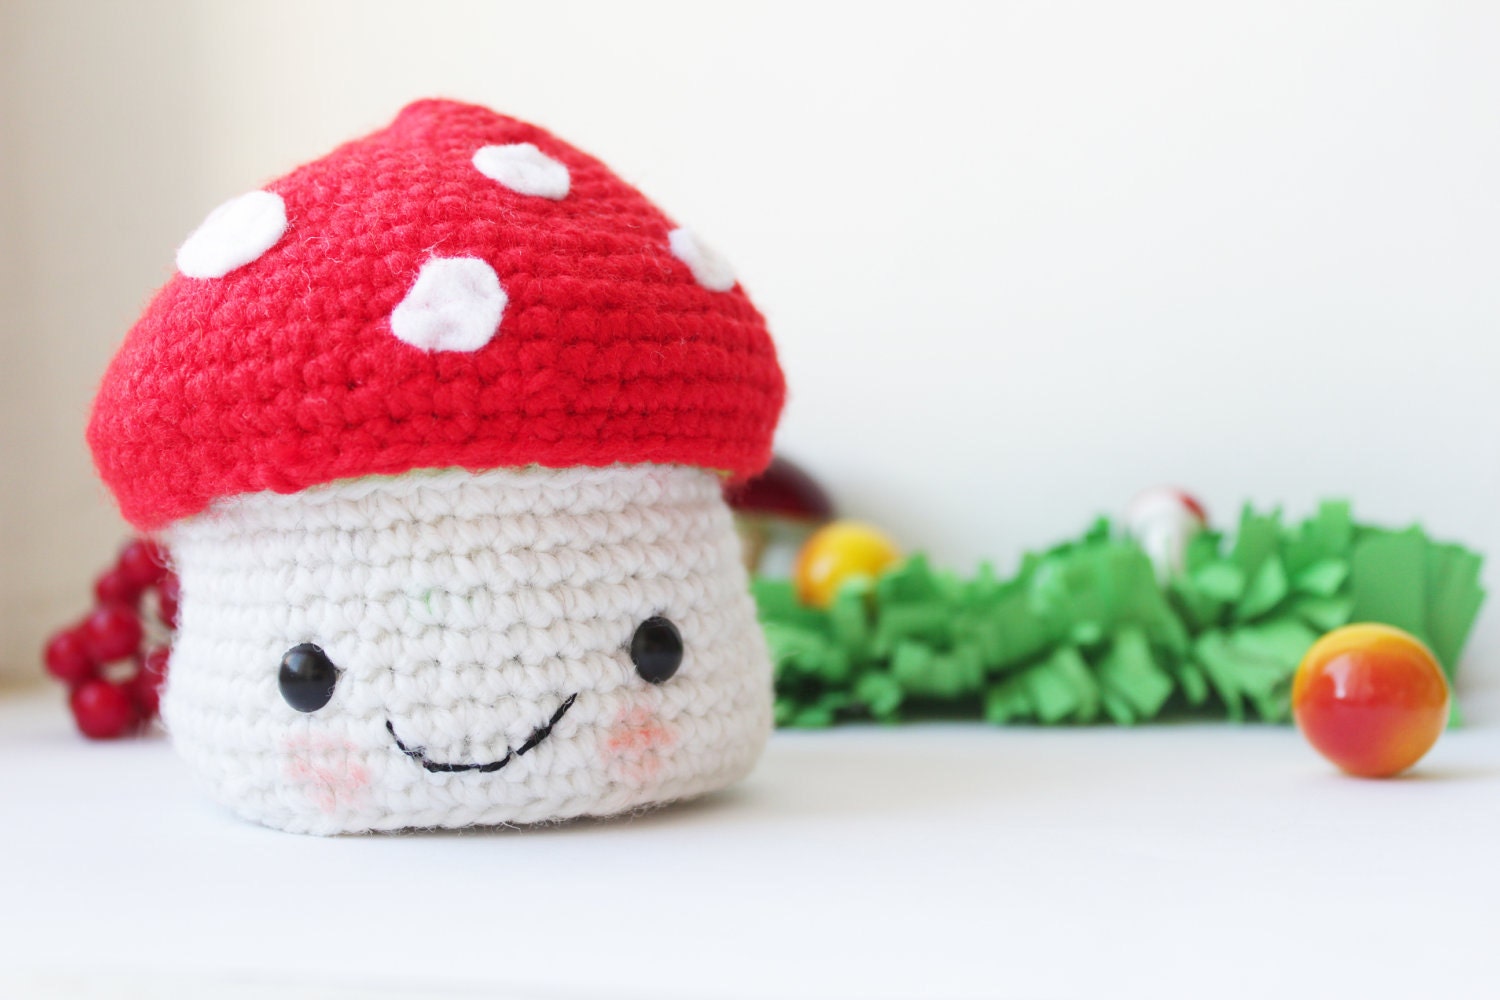 Amigurumi Mushroom jewelry box. Available in our Store!